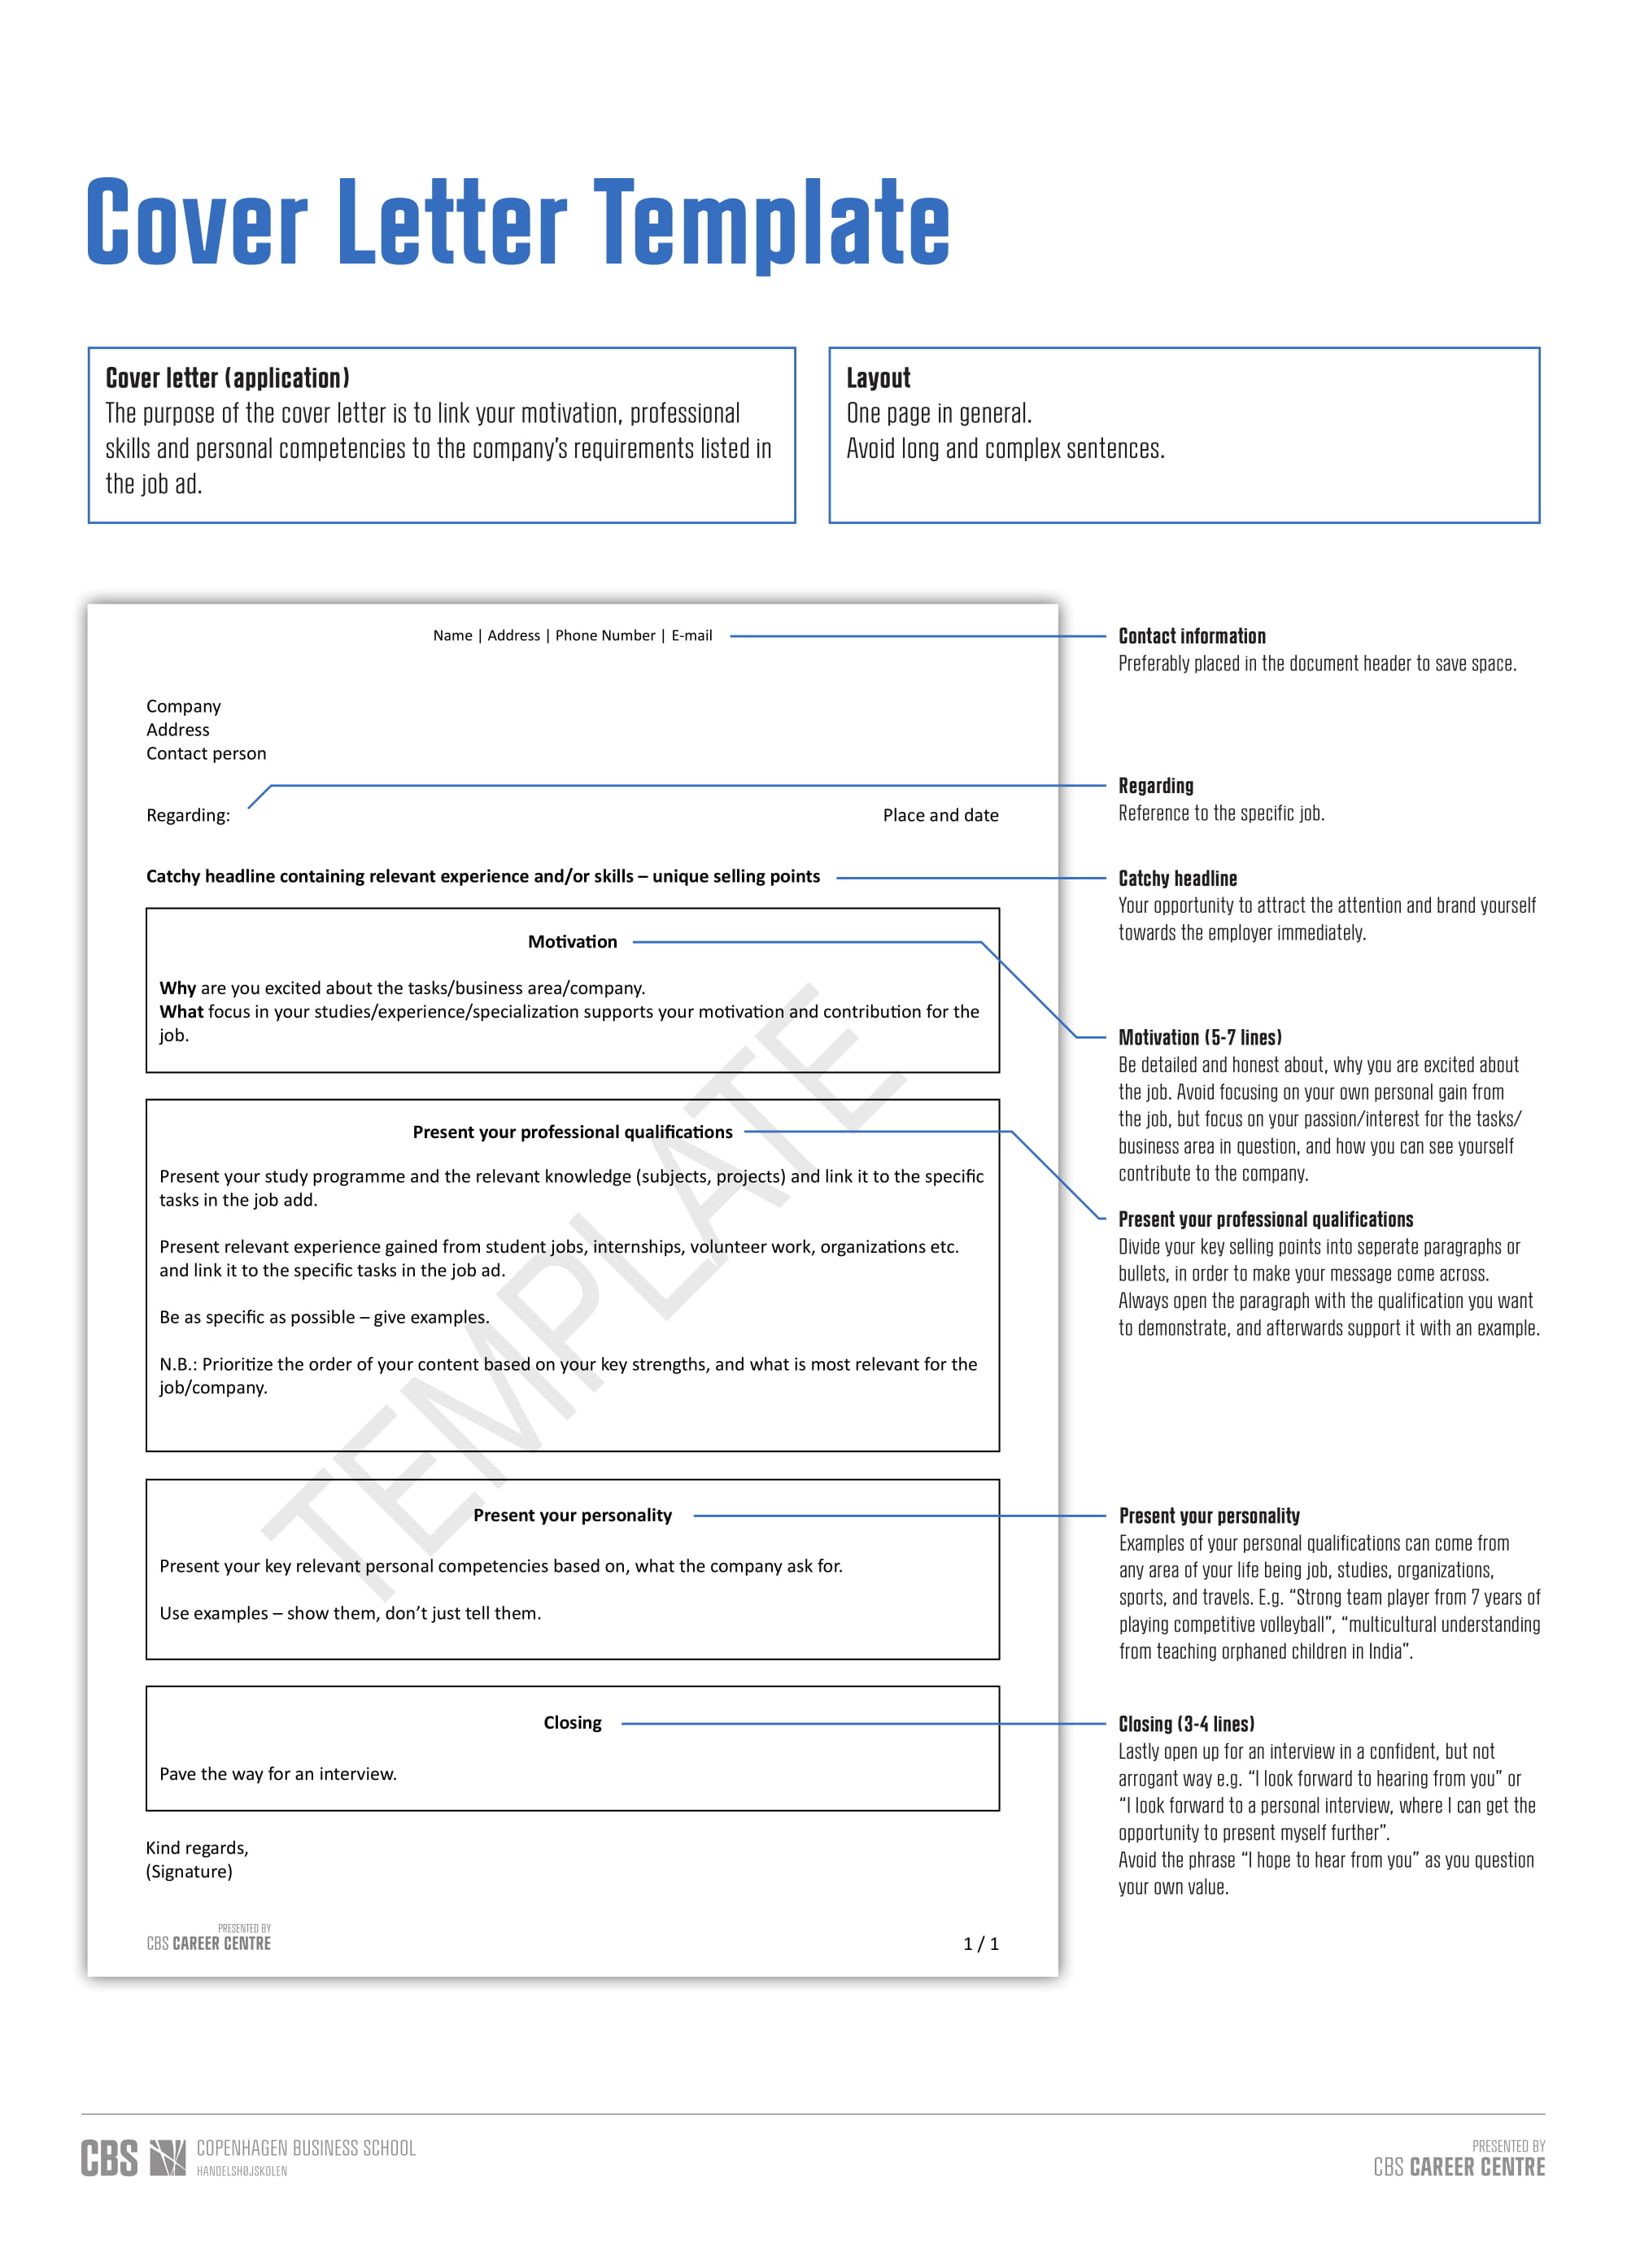 Download templates for pages cover letter senturinon